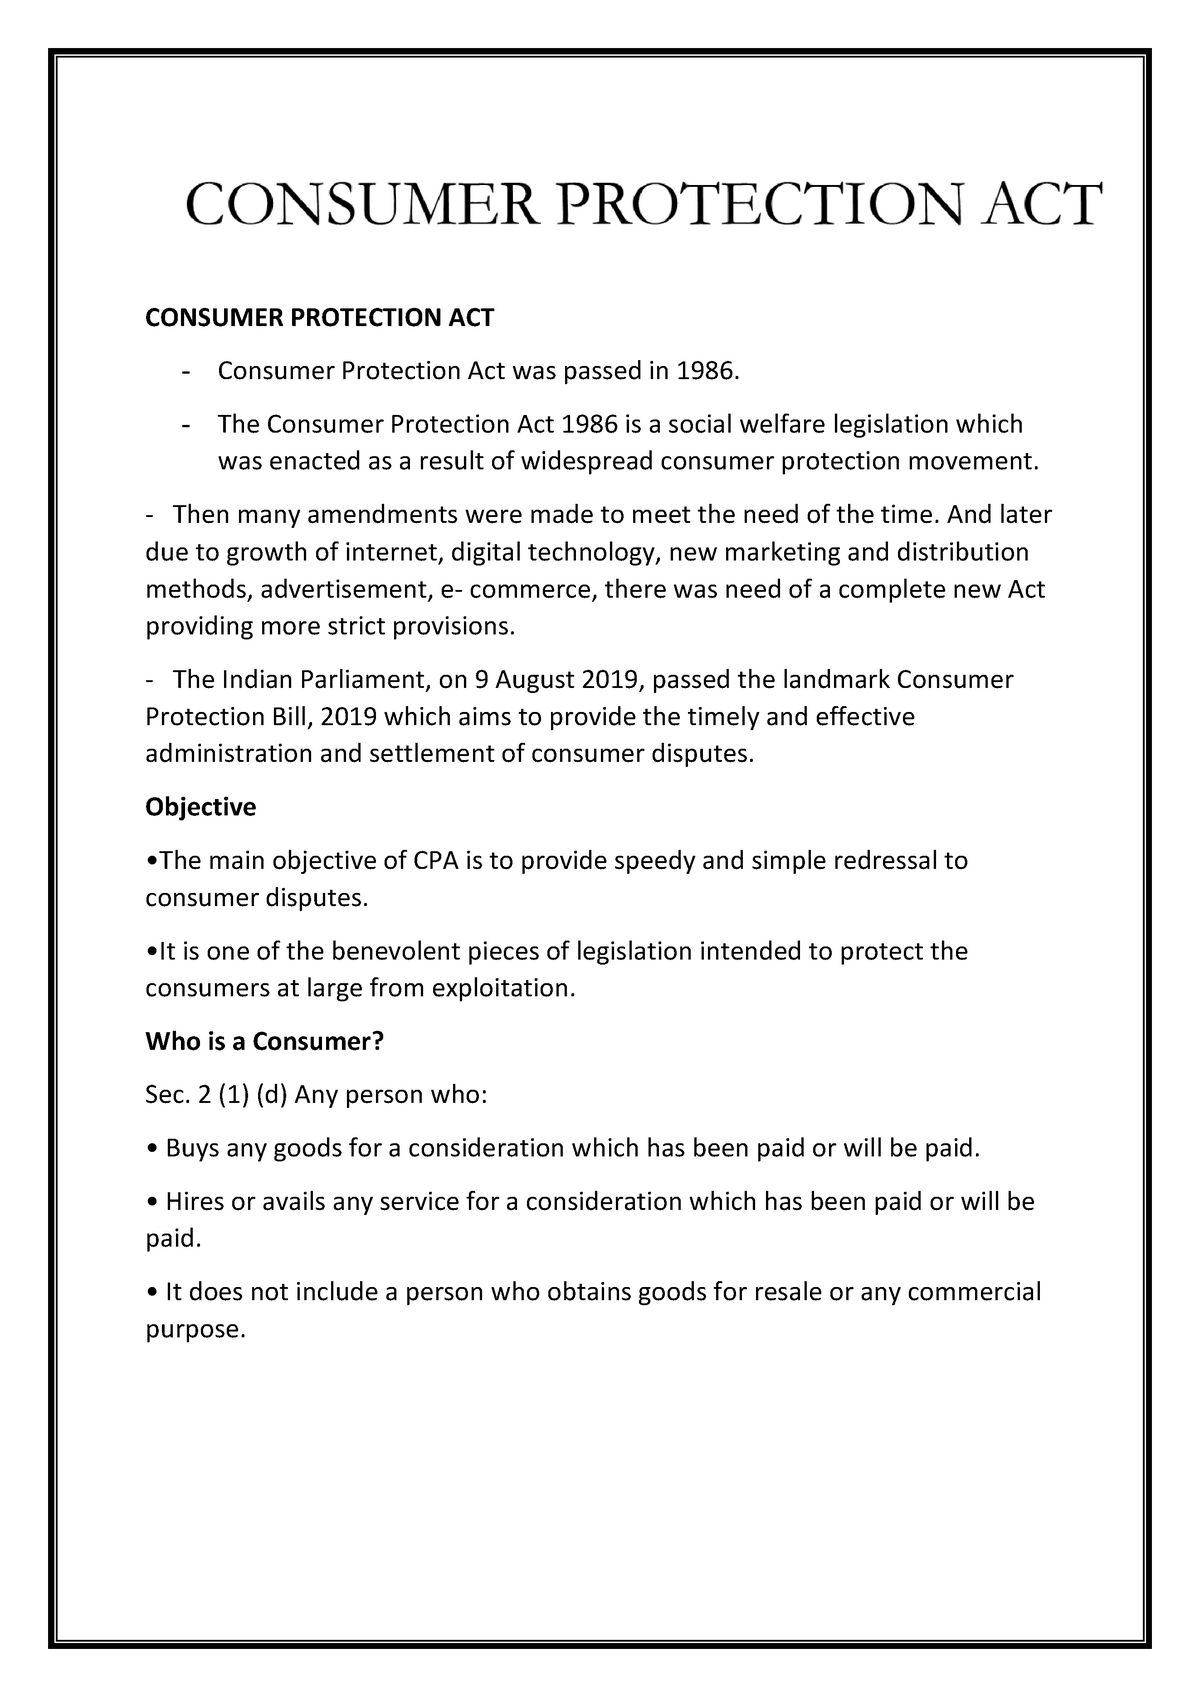 consumer protection act 1986 essay